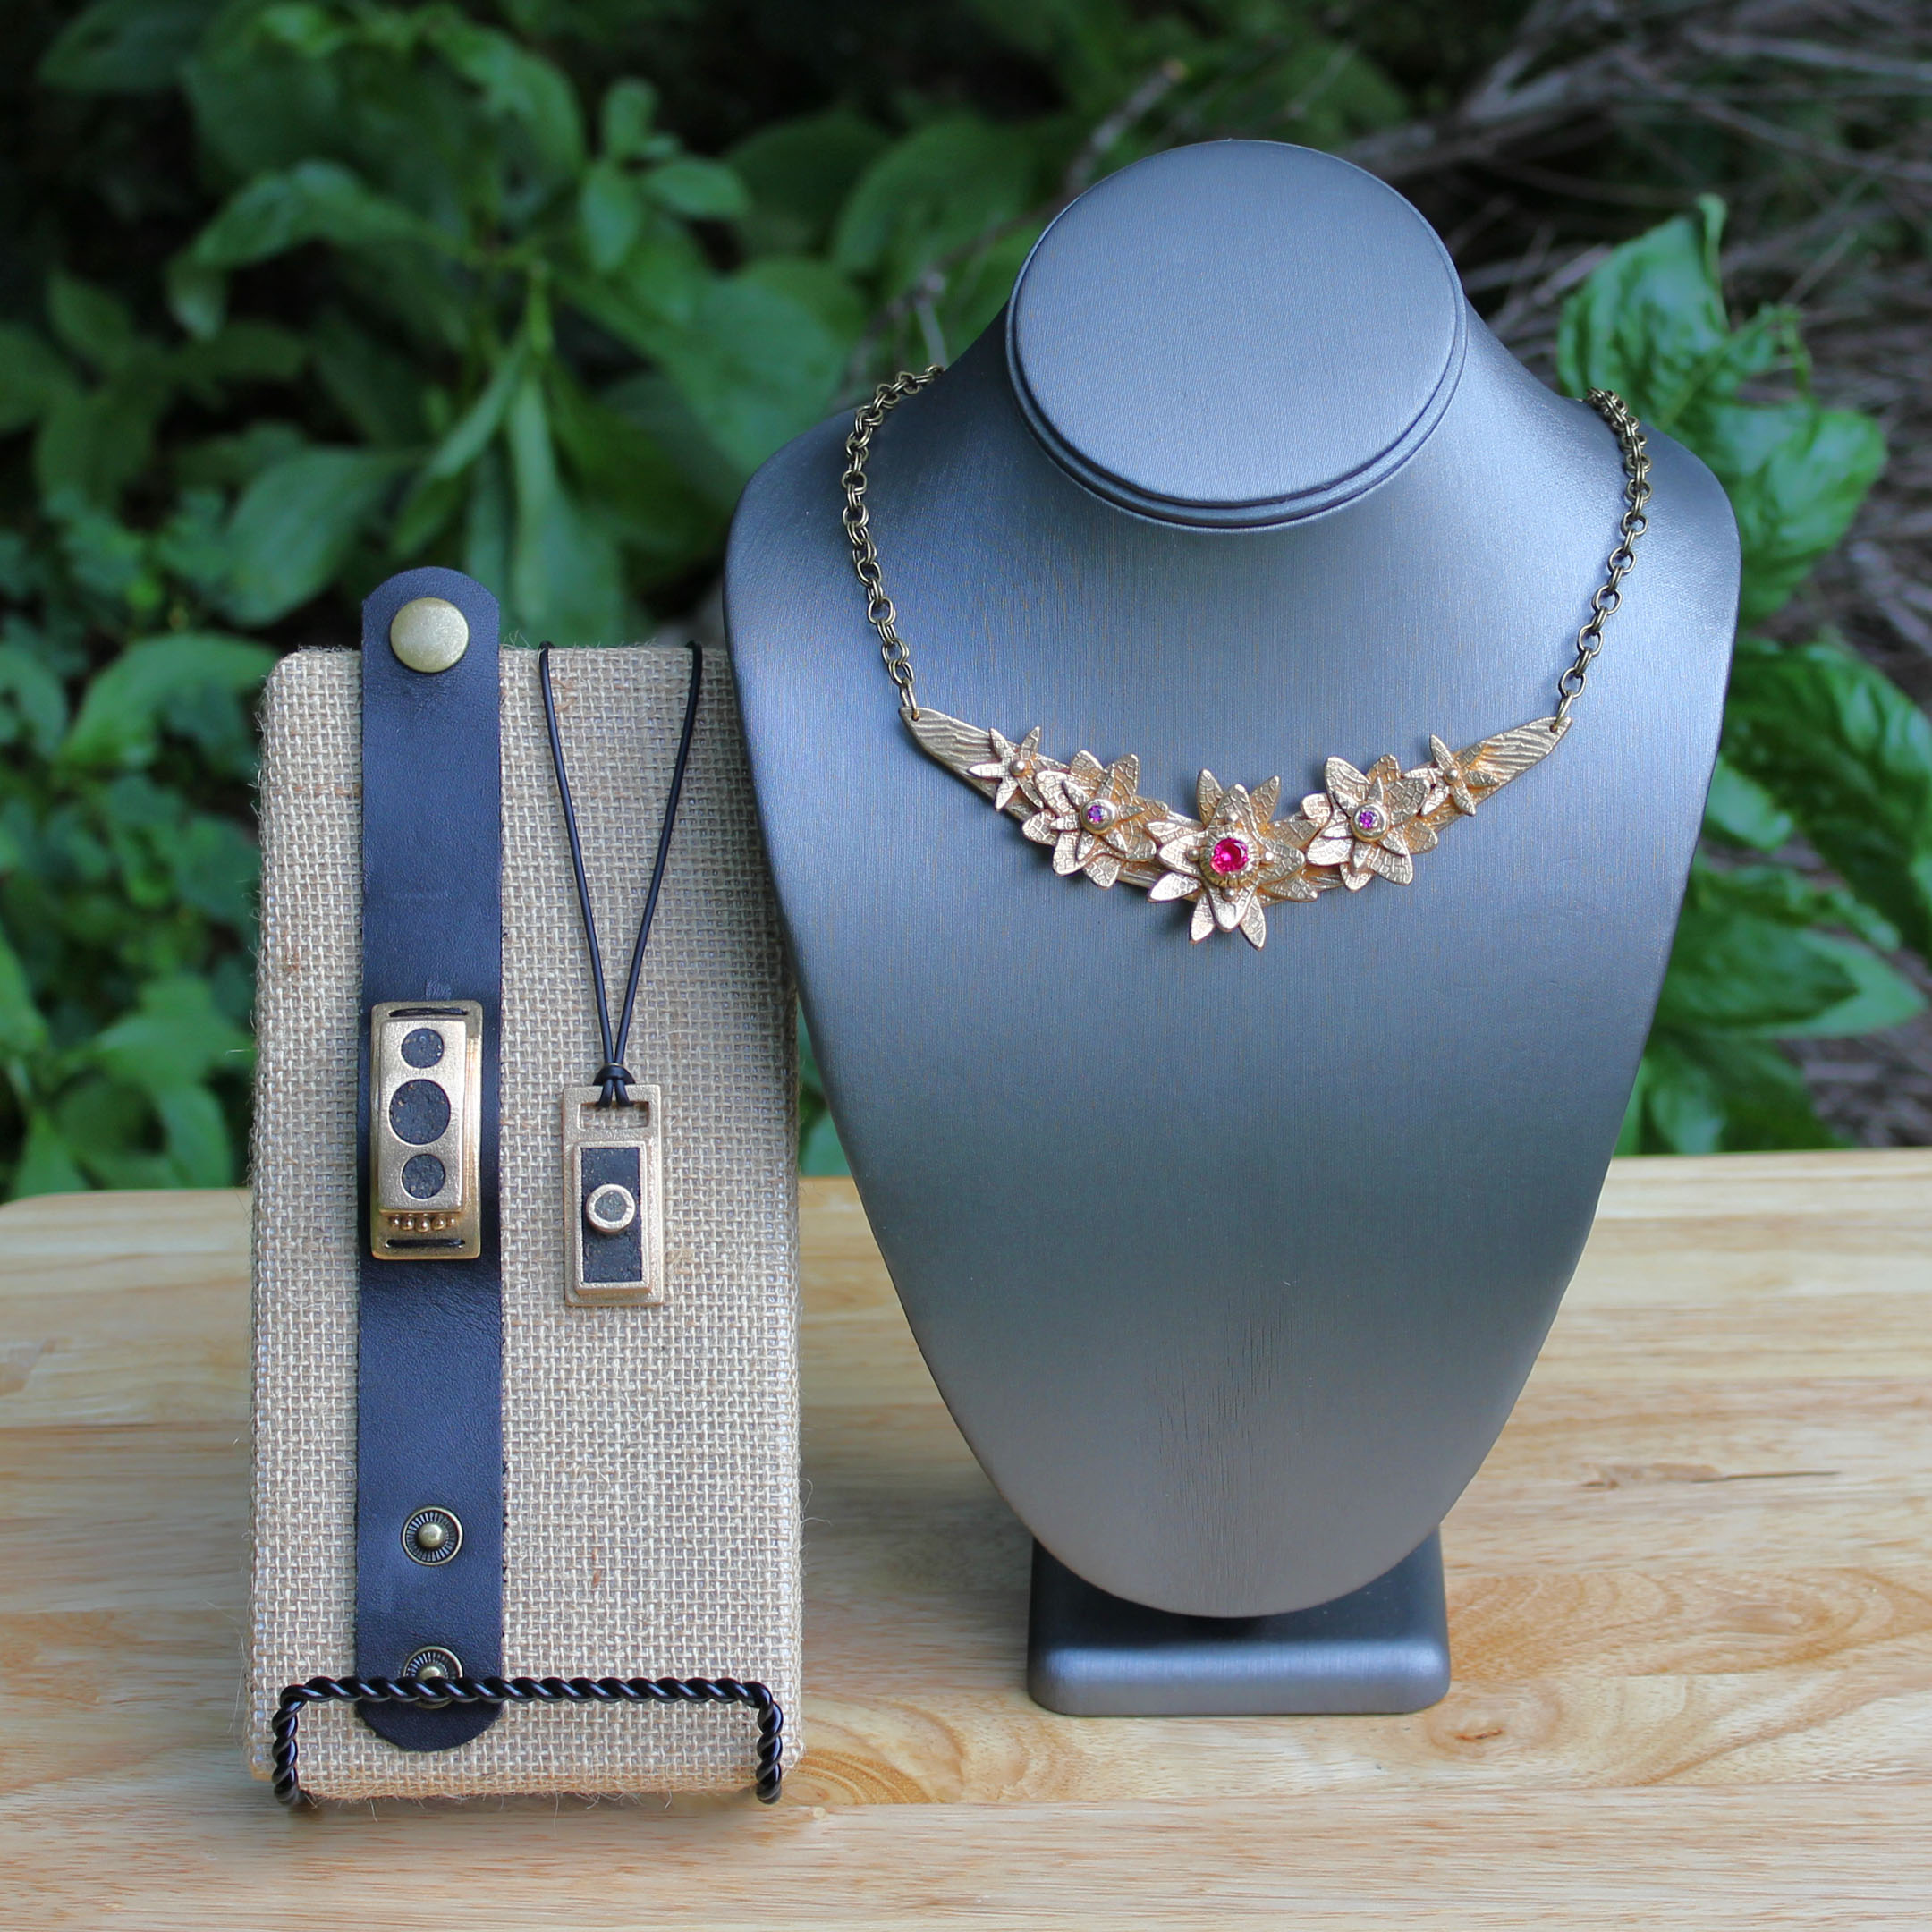 Display Piece featuring Floral Statement Necklace and Men's Pendant/Cuff by Kathryn Designs